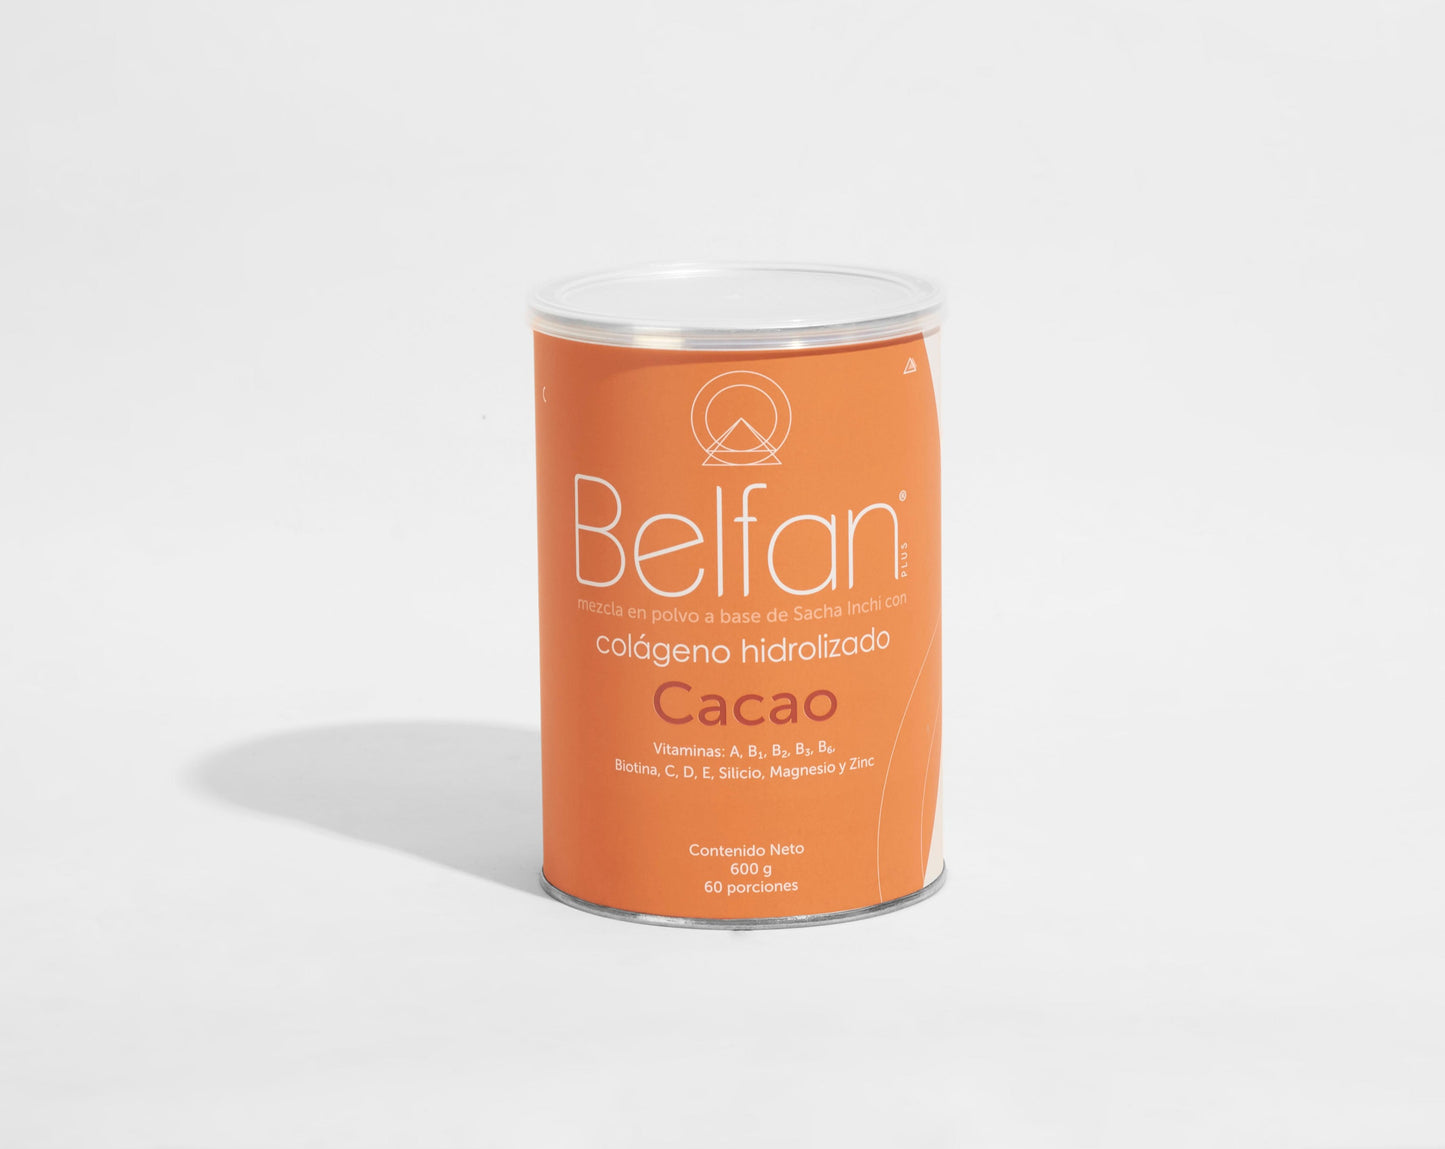 Belfan Cocoa and Silicon x 600g